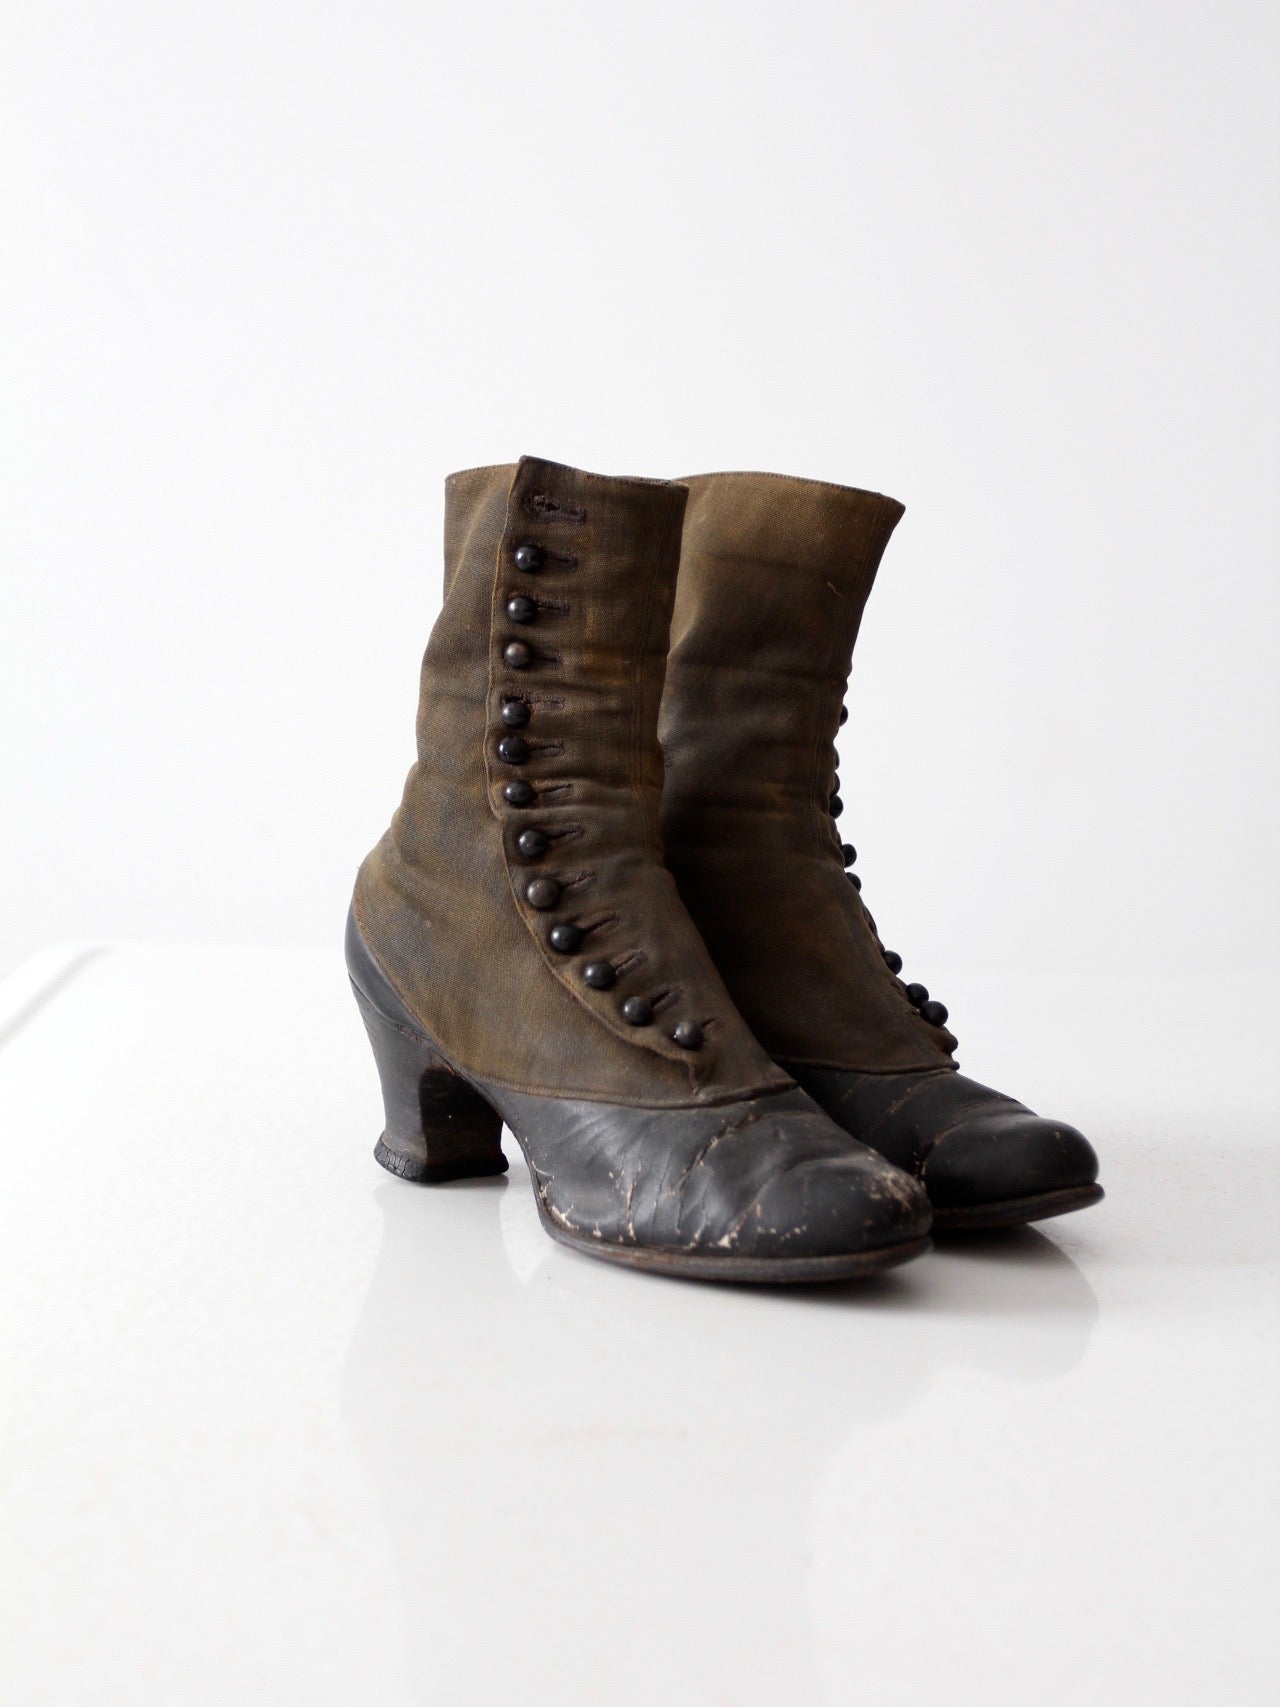 Antique Victorian Two-tone Lace-up Boots / Vintage Gray and 